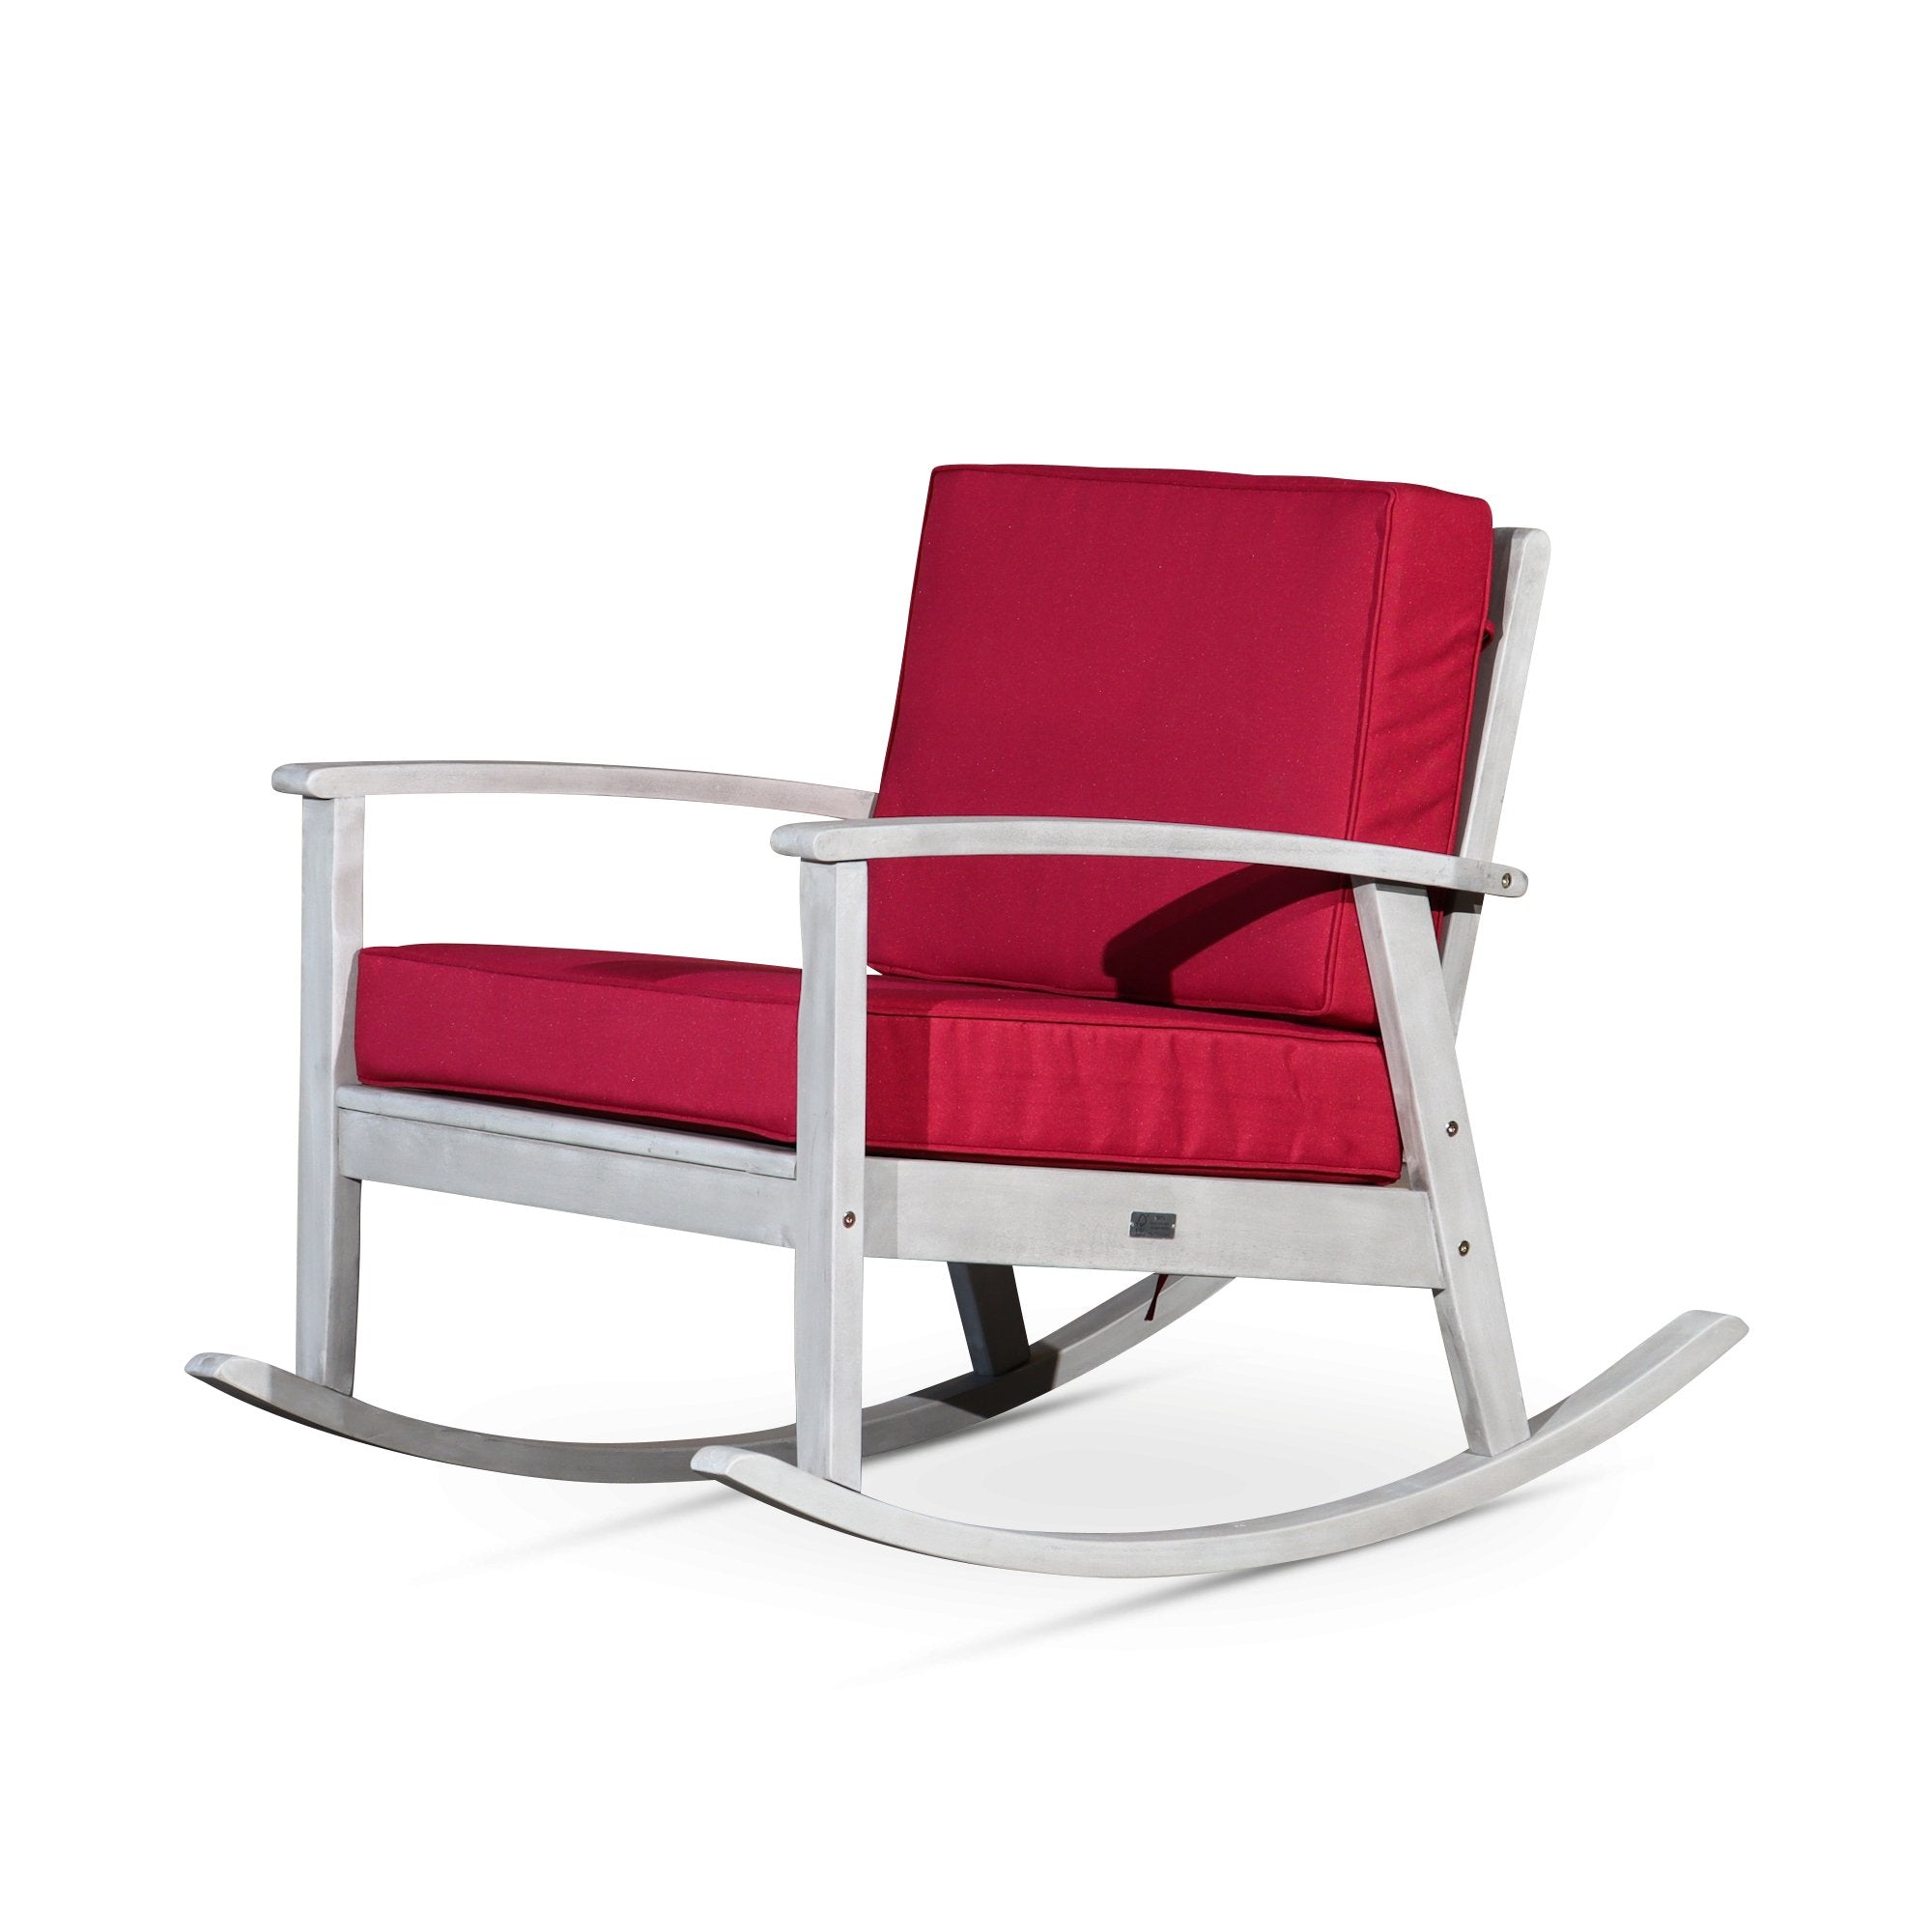 Outdoor-Rocking-Chair-with-Cushions,-Silver-Gray-Finish,-Burgundy-Cushions-Outdoor-Chairs